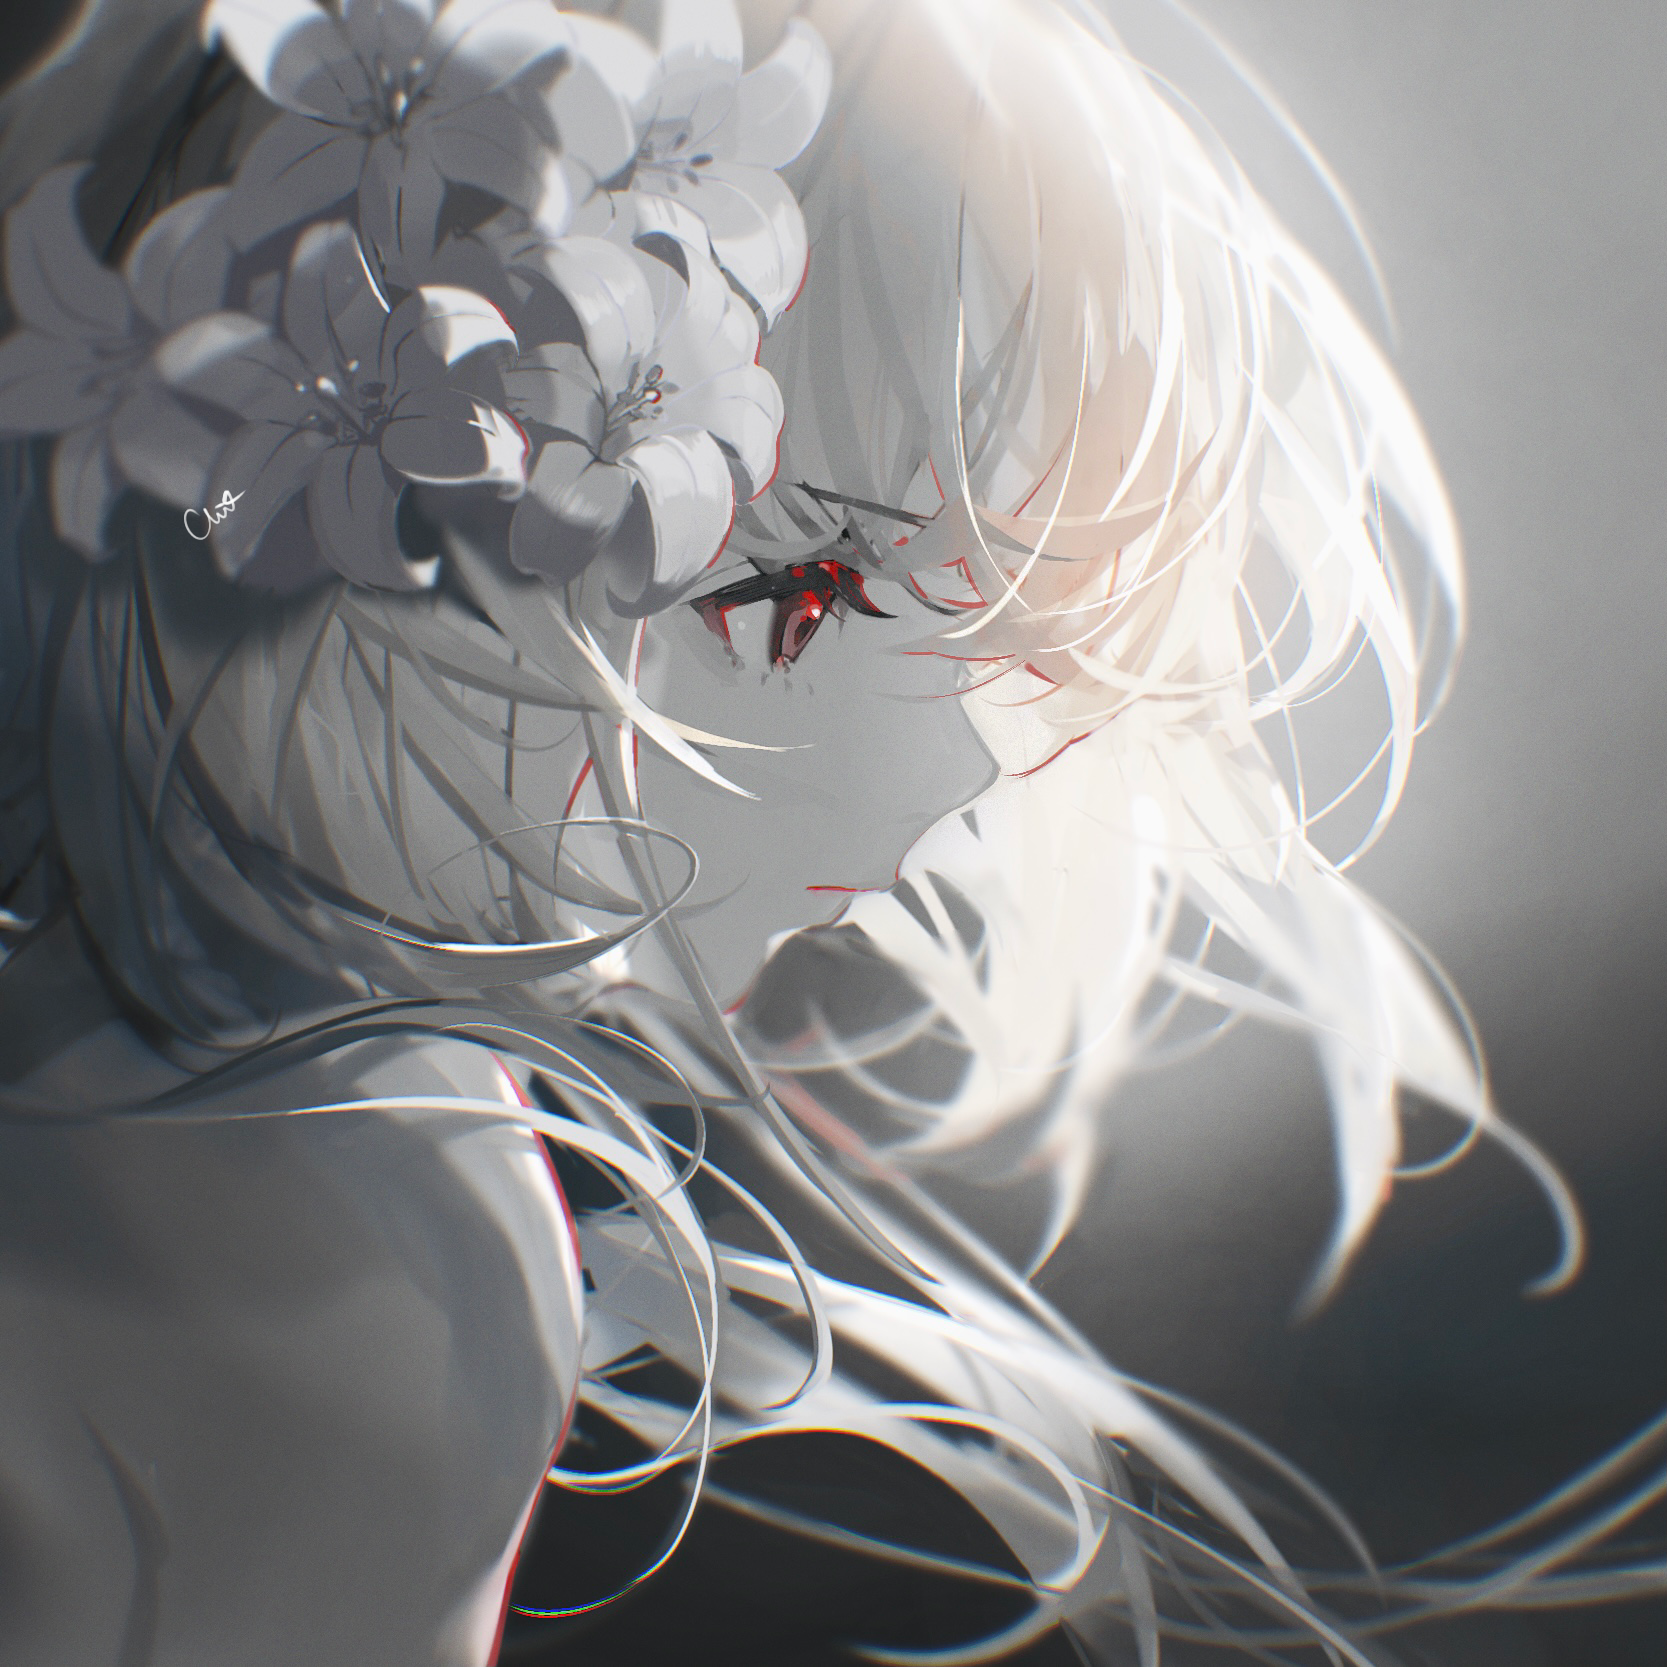 anime girl with white hair and white eyes